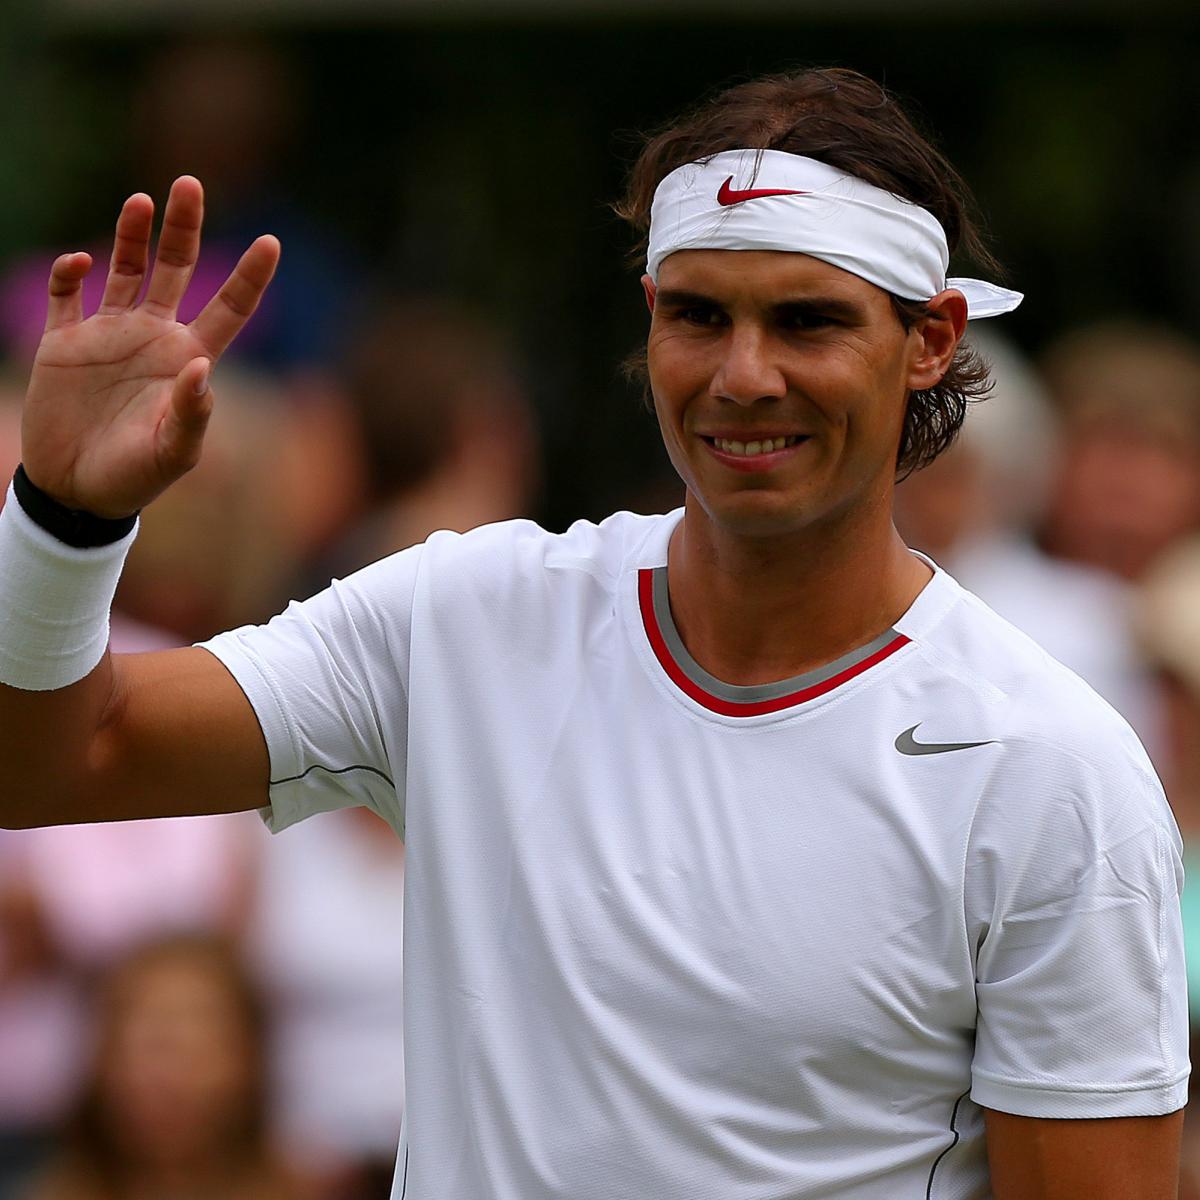 What Are the Chances Rafael Nadal Will Bounce Back at the 2013 US Open